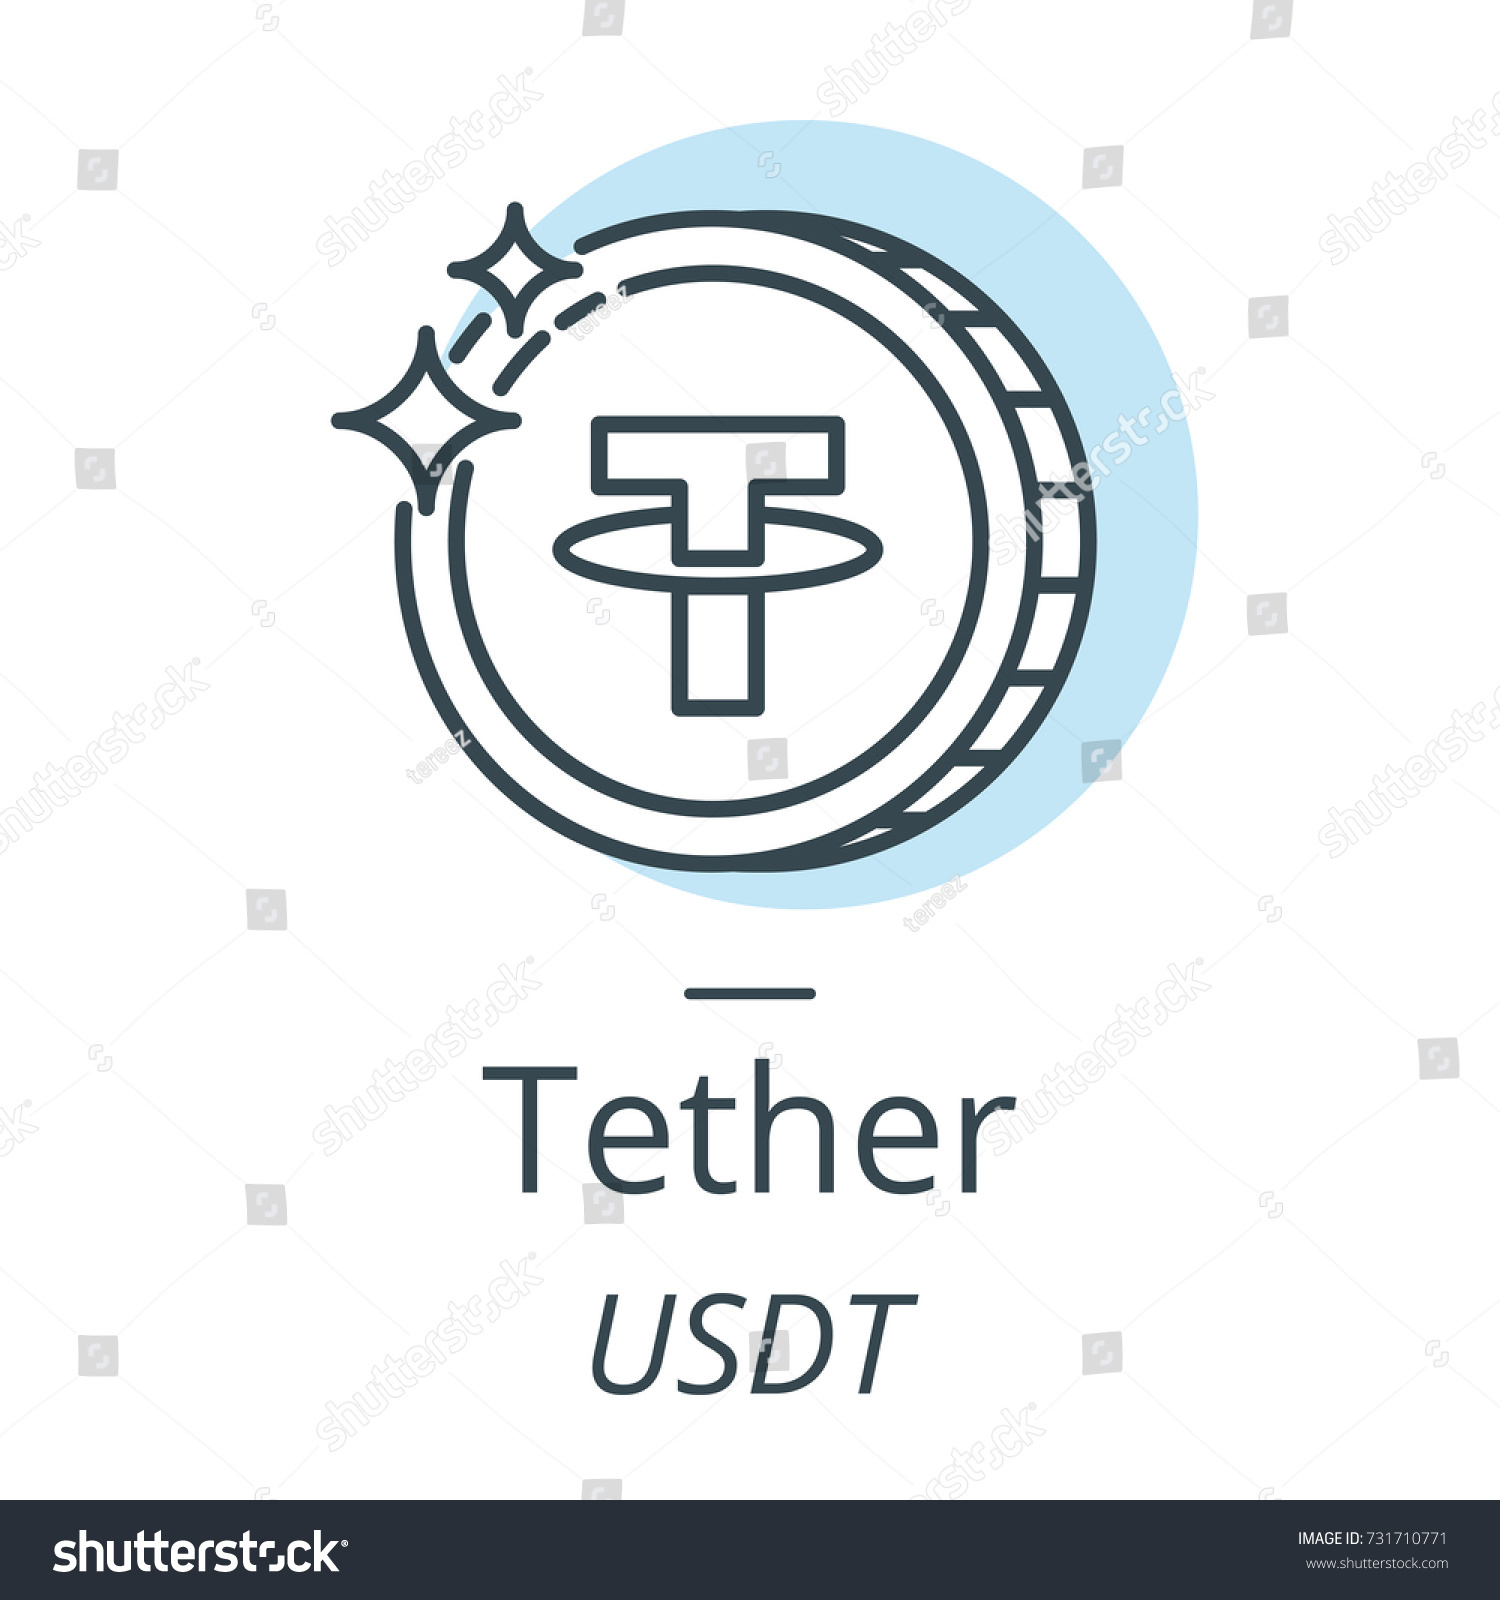 All you need to know about Tether cryptocurrency